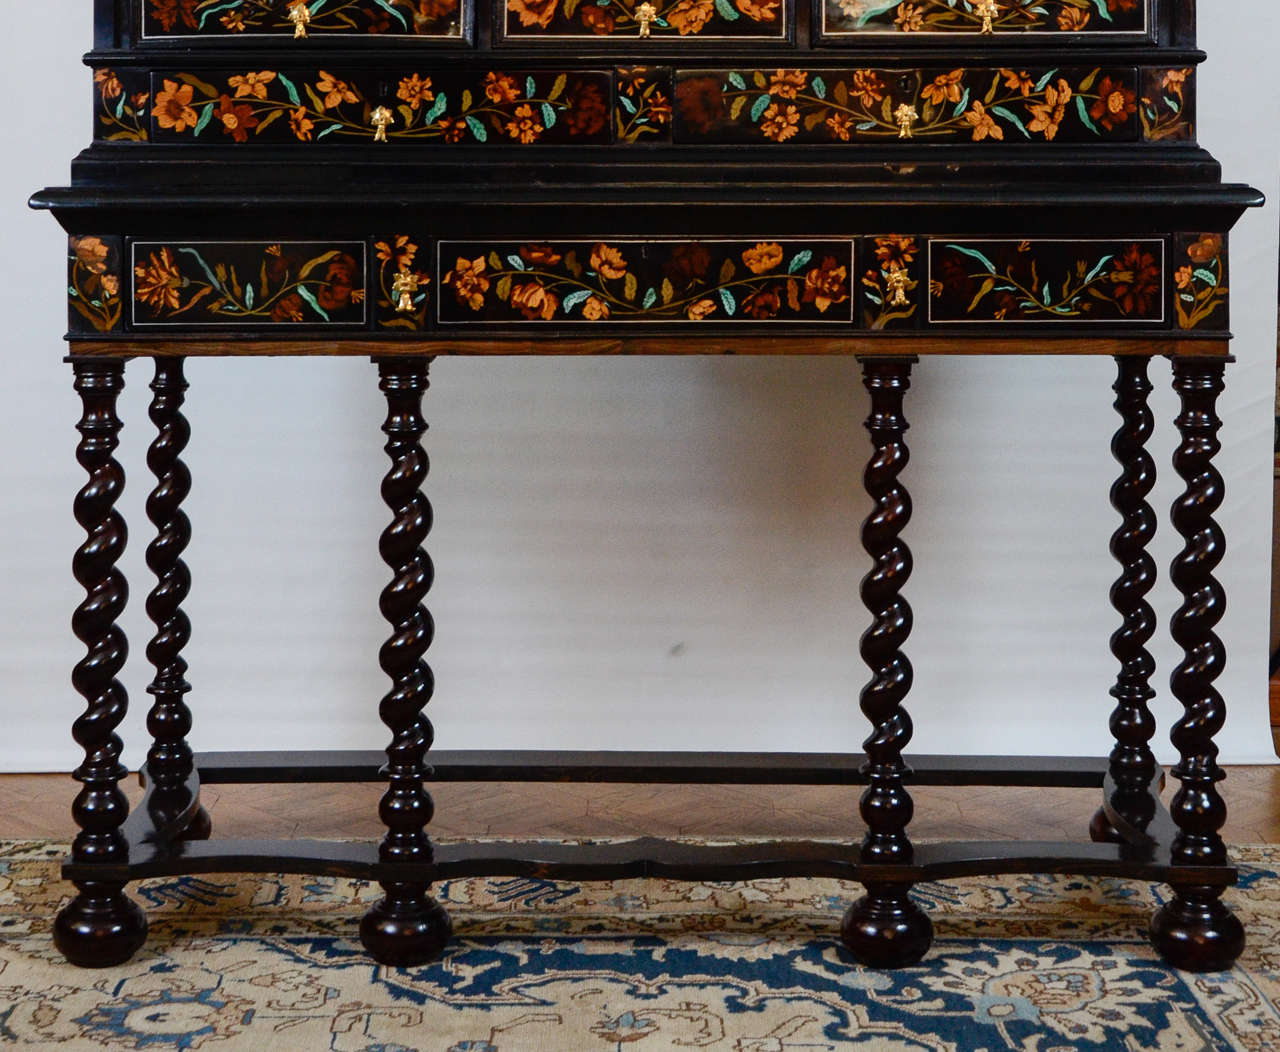 The cabinet fitted with 14 drawers and a door on a stand with 
six twist-turned columns joined by a stretcher and above a big drawer. The marquetry of birds, flowers and vases is very luxurious with many different woods, ebony and bone stained